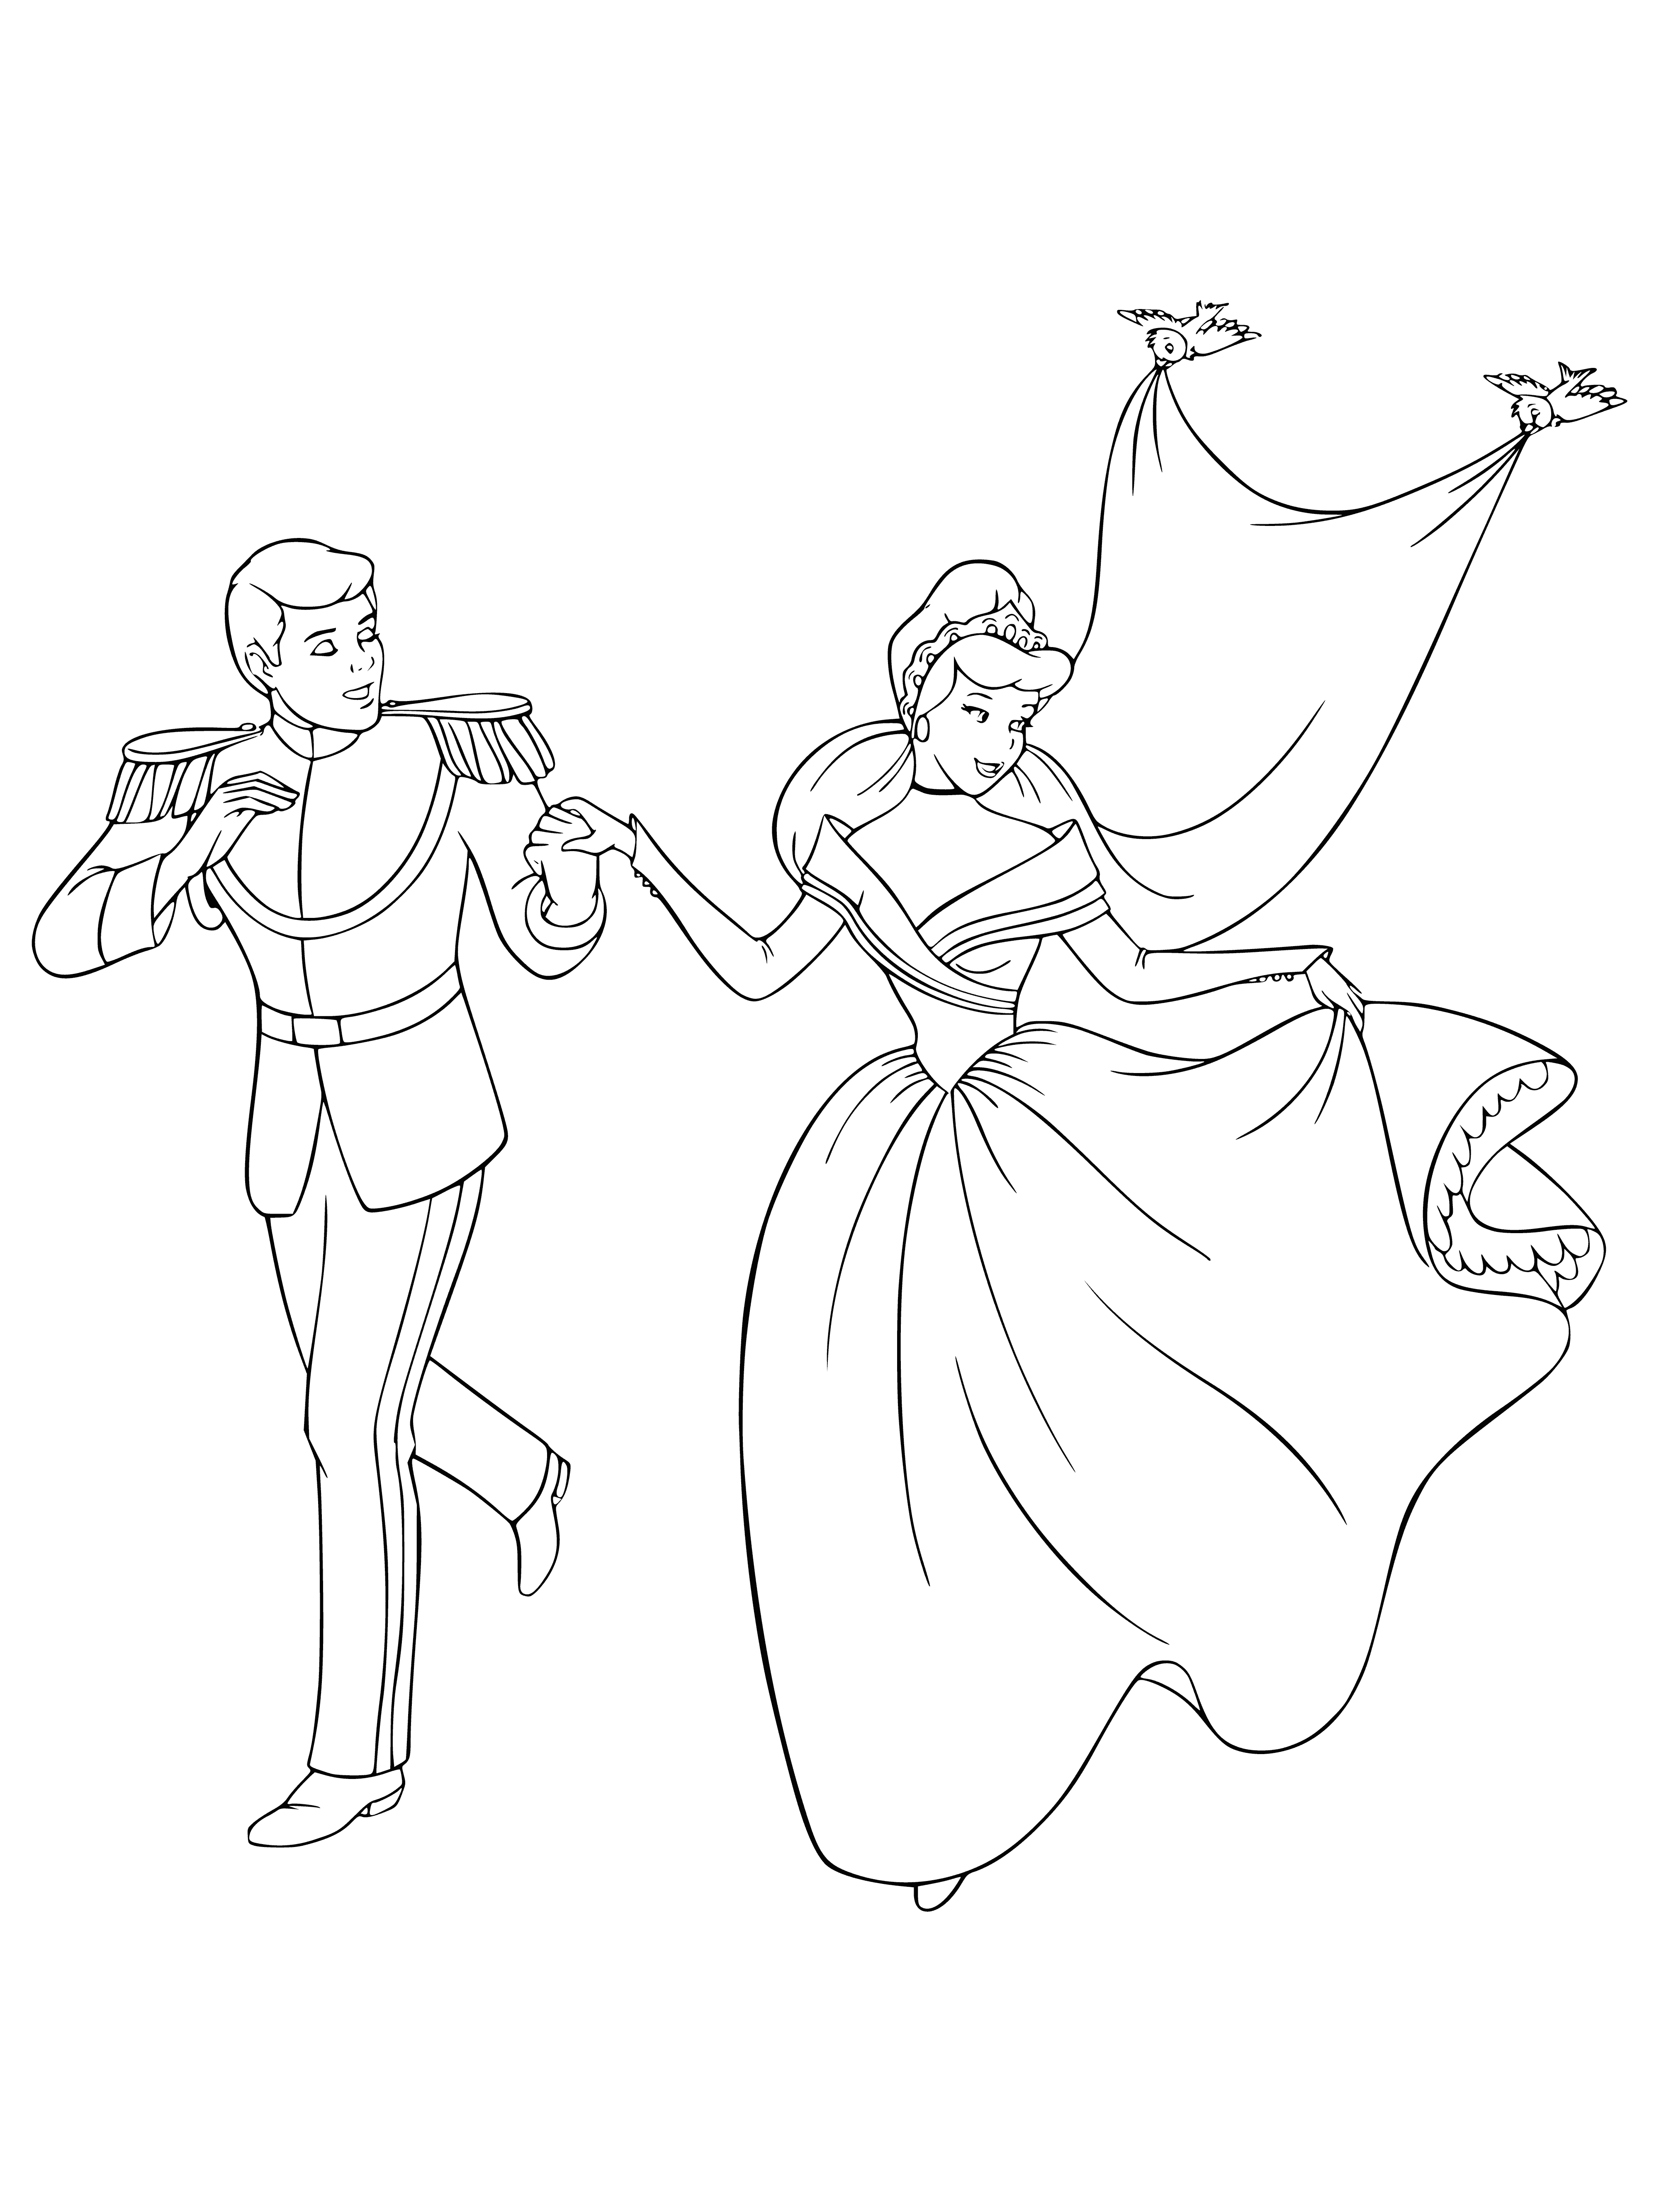 coloring page: Cinderella stands at altar marrying Prince while bluebird perches on her shoulder. Cheers & claps from guests fill the air in celebration. #happilyeverafter